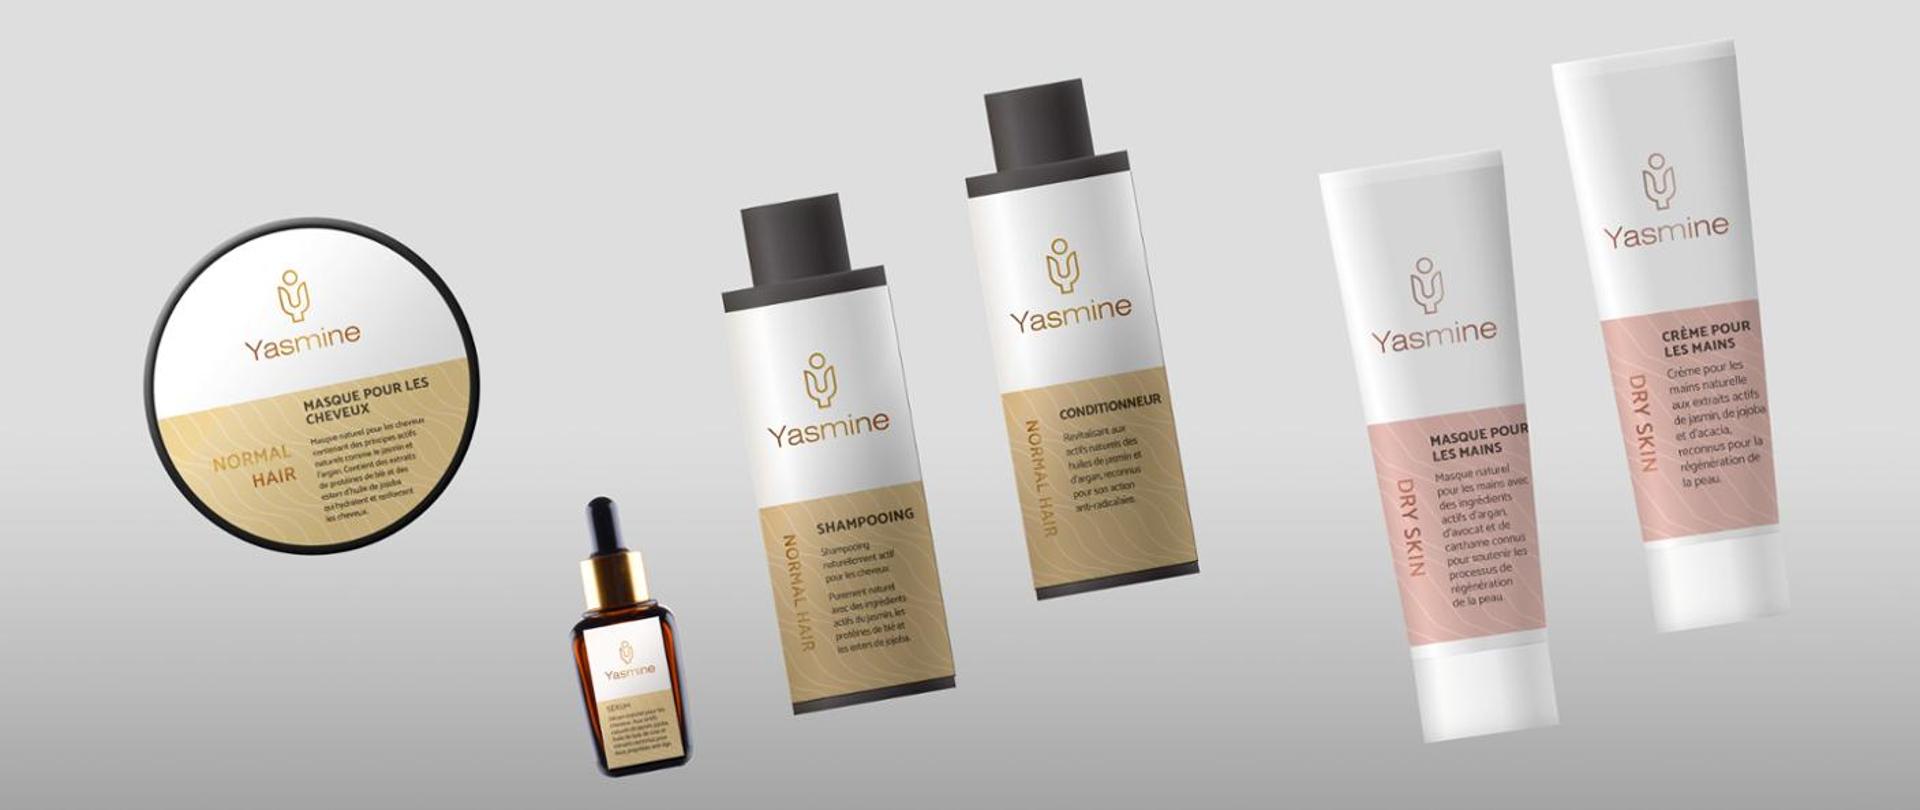 A complete line of Yasmine natural cosmetics. All recipes are free of sodium alkyl sulphates and their analogues, in line with the purpose of the Project
